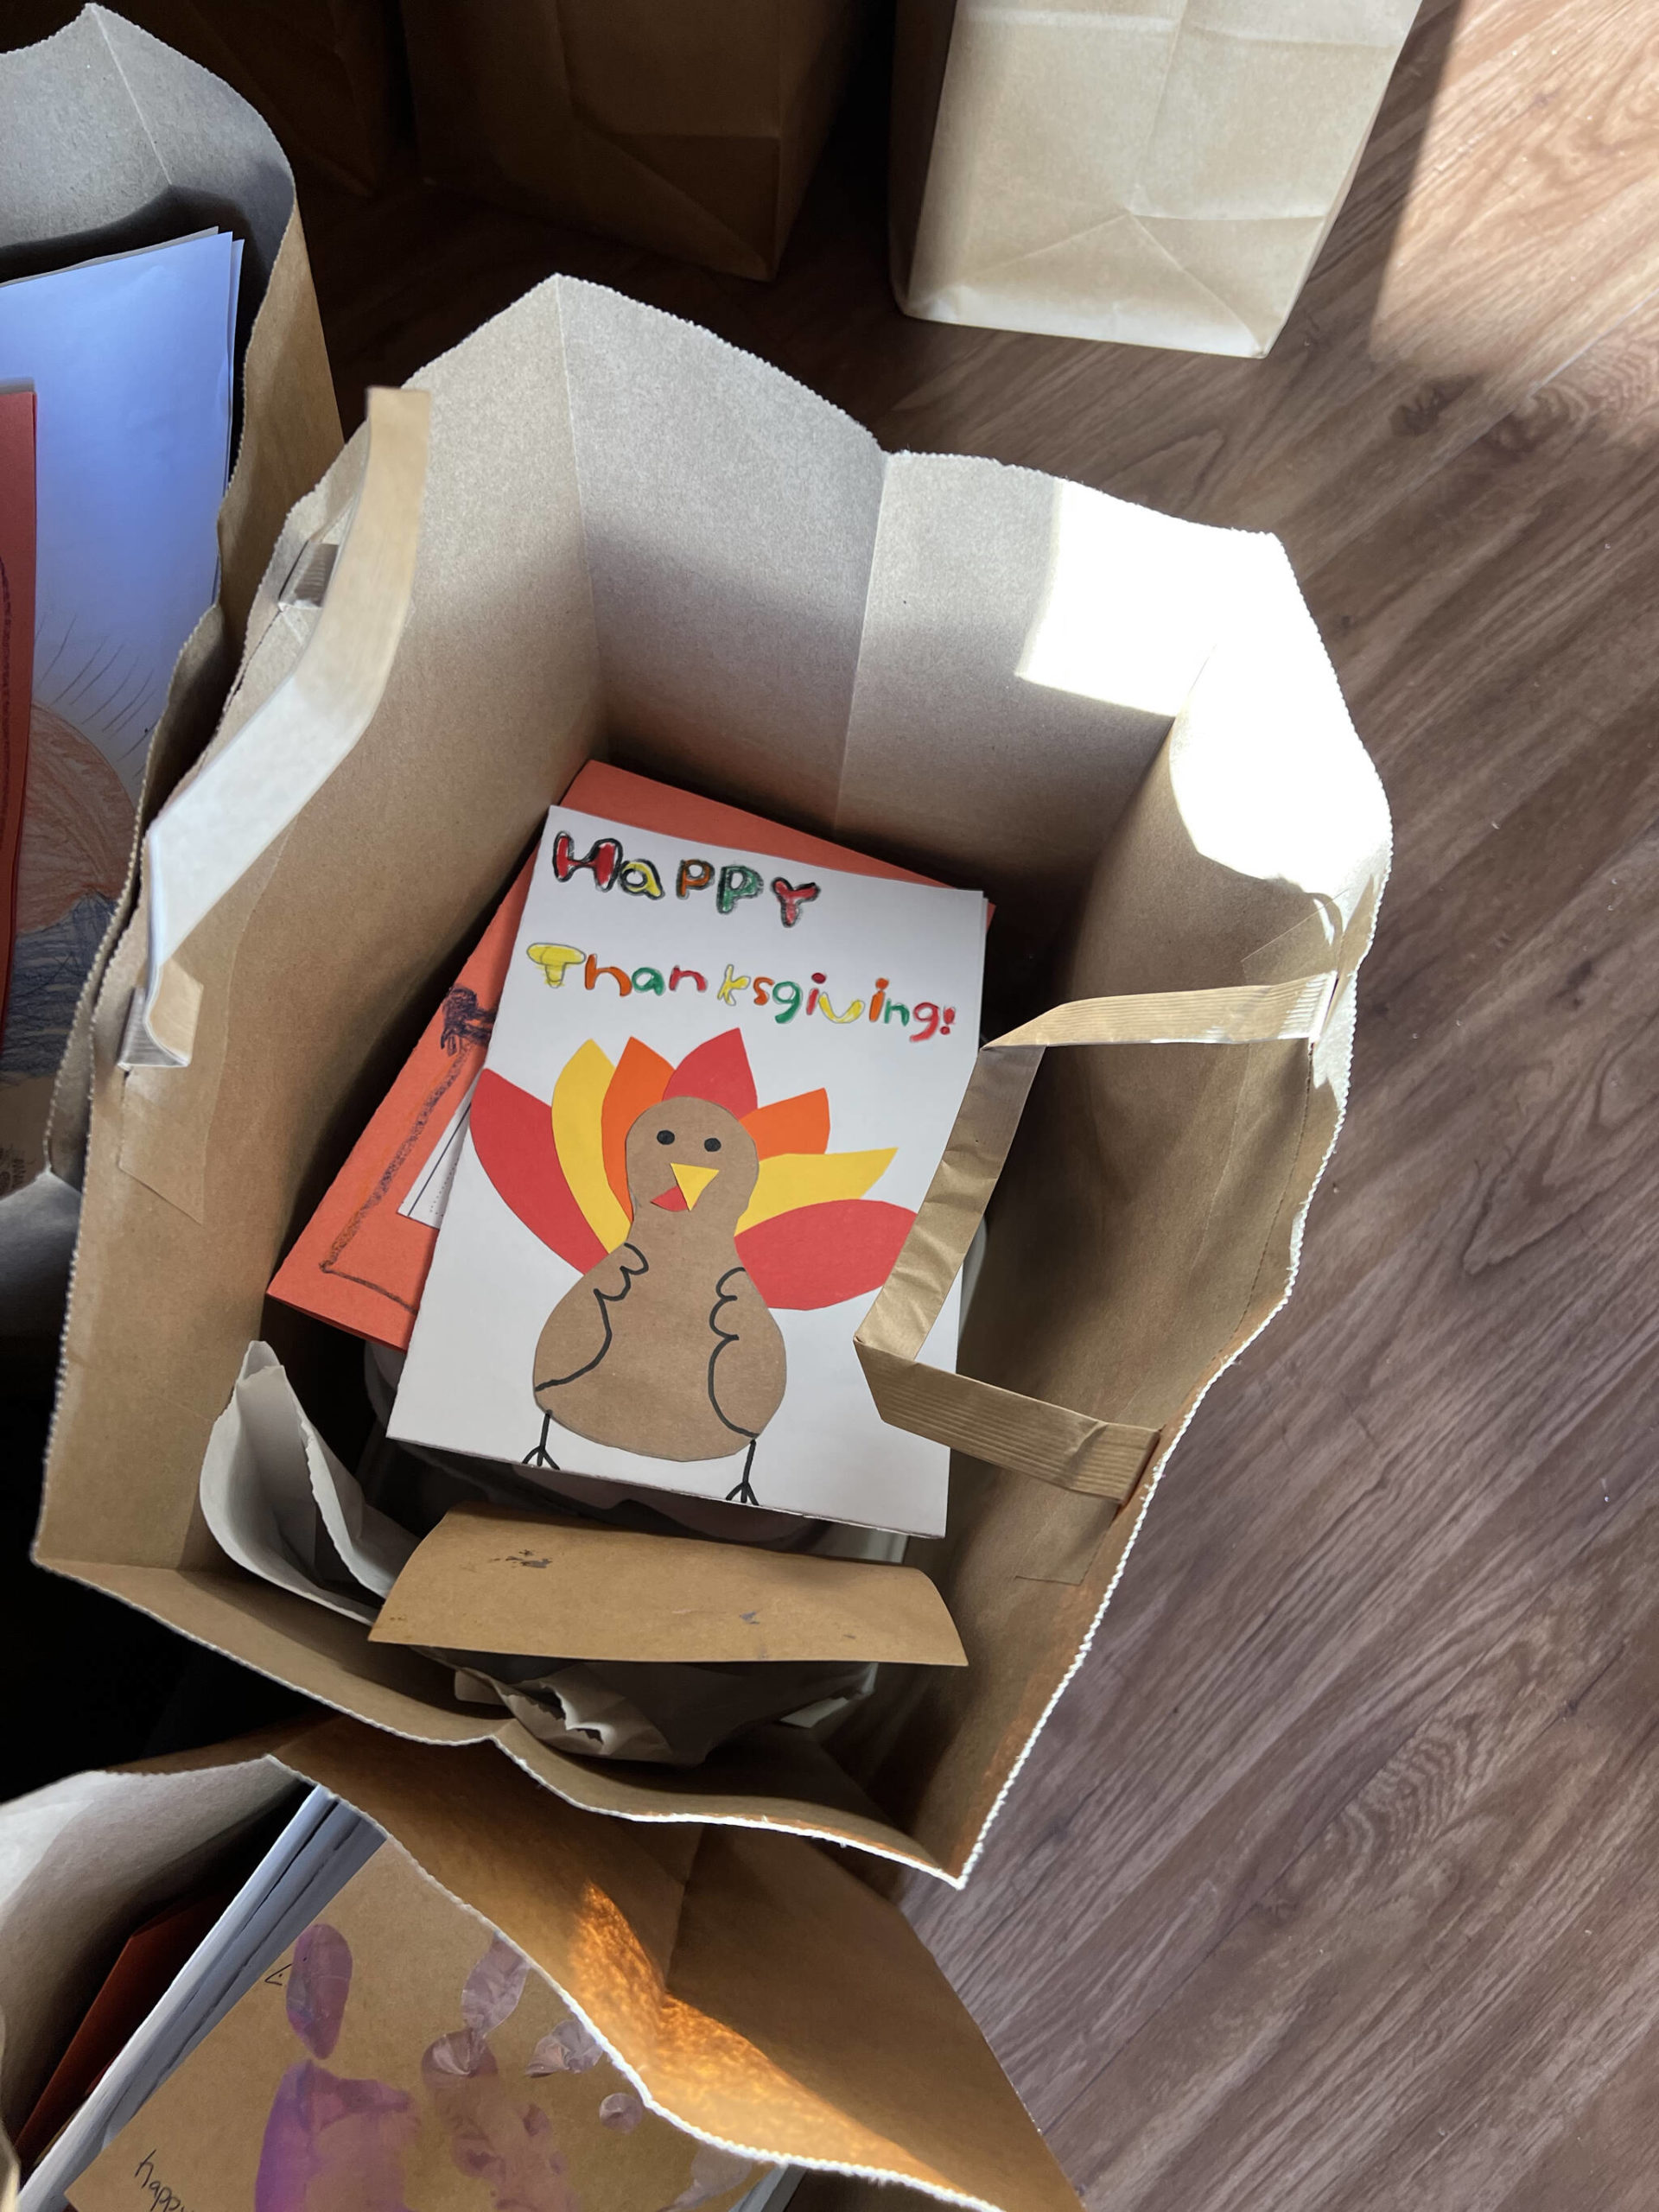 Cards and letters made by school children from Bainbridge Island are included with the turkey dinner deliveries.